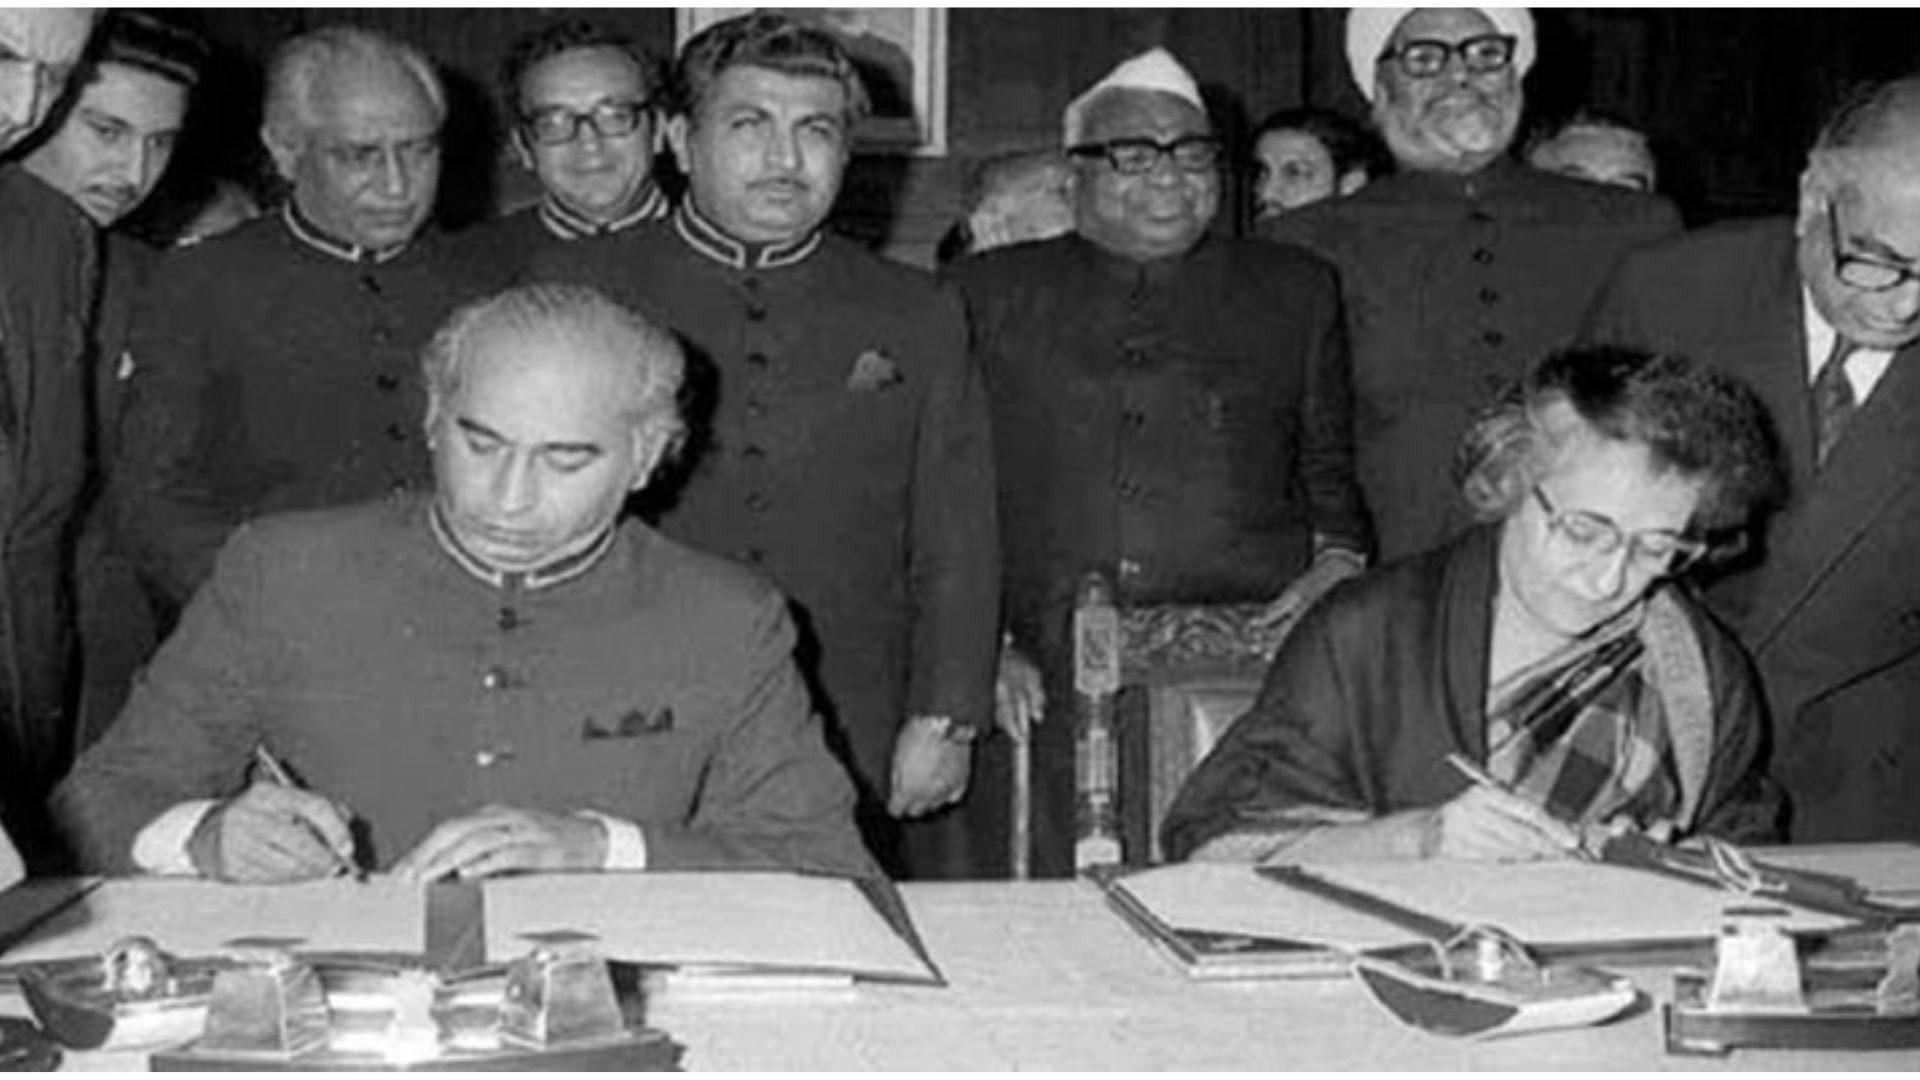 The agreement, signed in July 2, 1972, bound the two countries "to settle their differences by peaceful means through bilateral negotiations" | India Vs Disinformation